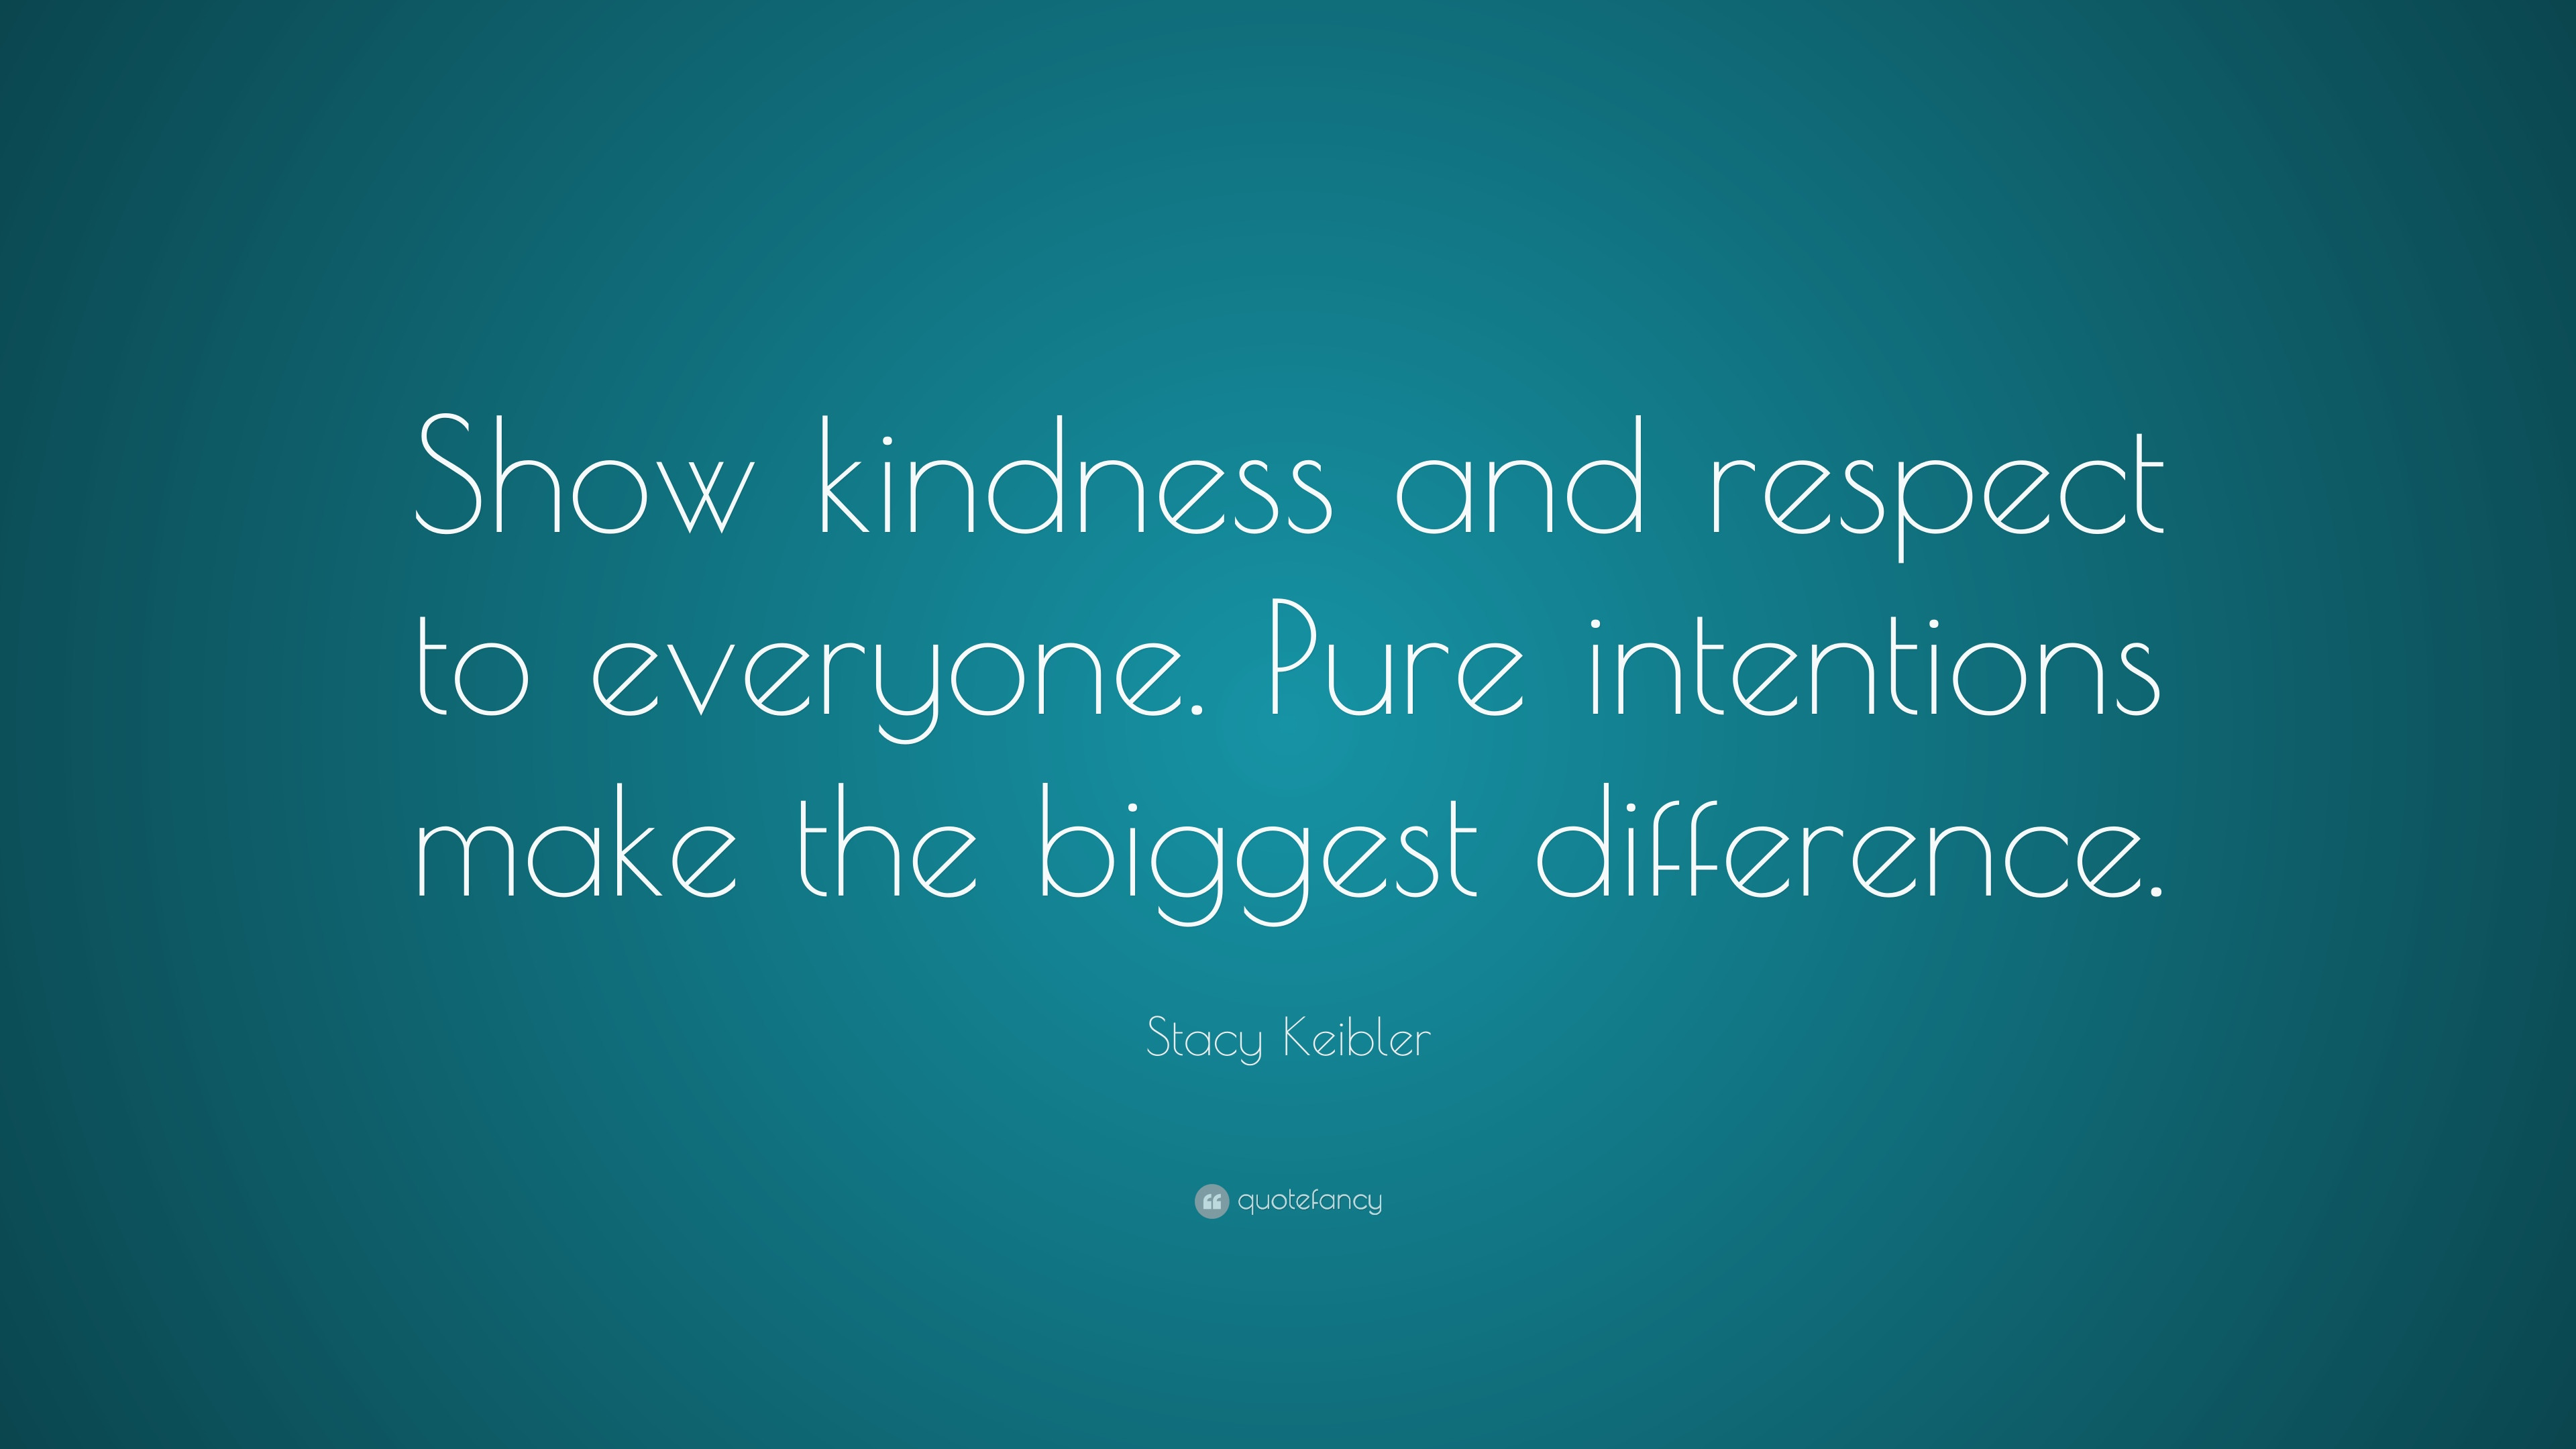 Kindness And Respect Quotes
 Stacy Keibler Quote “Show kindness and respect to